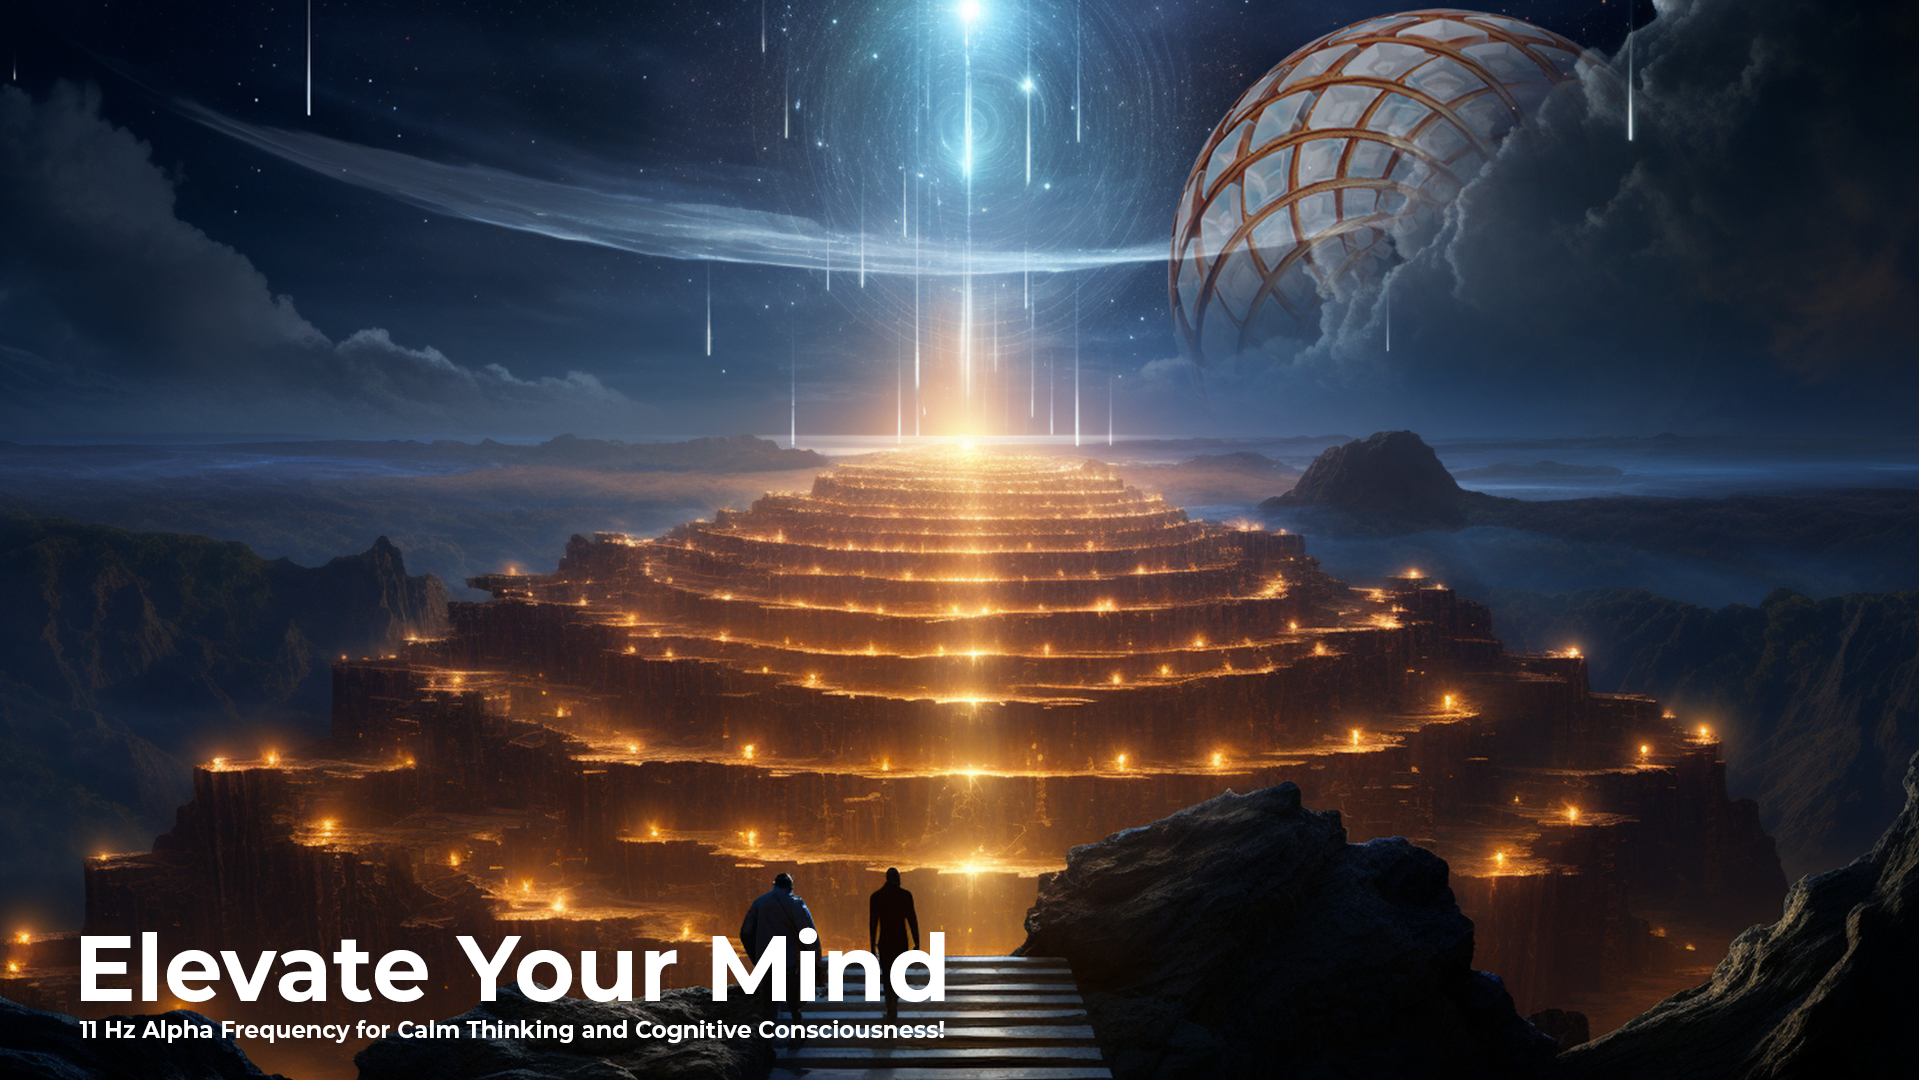 Elevate Your Mind: 11 Hz Alpha Frequency for Calm Thinking and Cognitive Consciousness